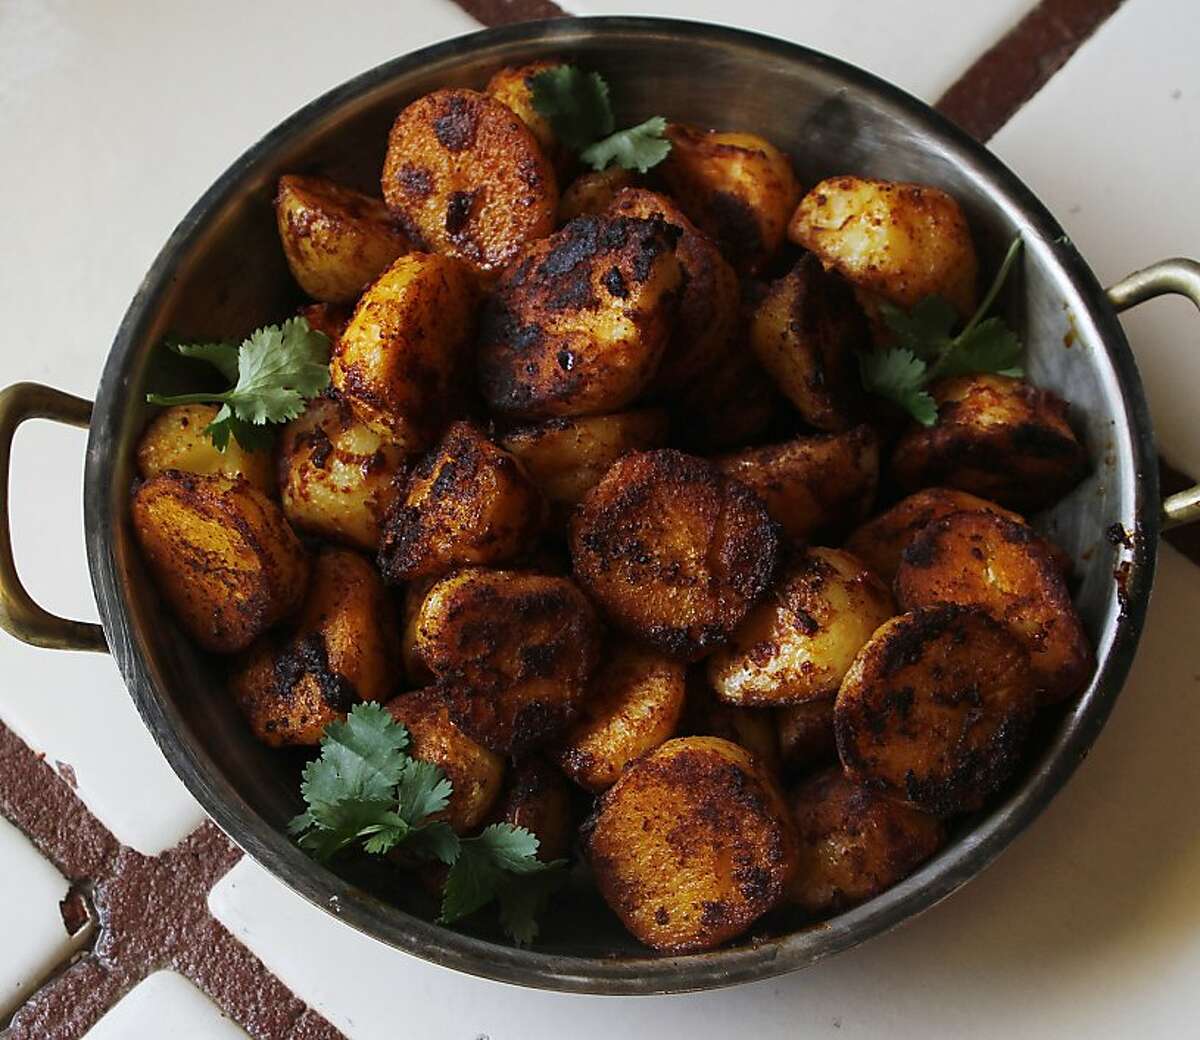 Spicy Potatoes from Jacqueline Higuera McMahan for the South to North column, 4/15/2012